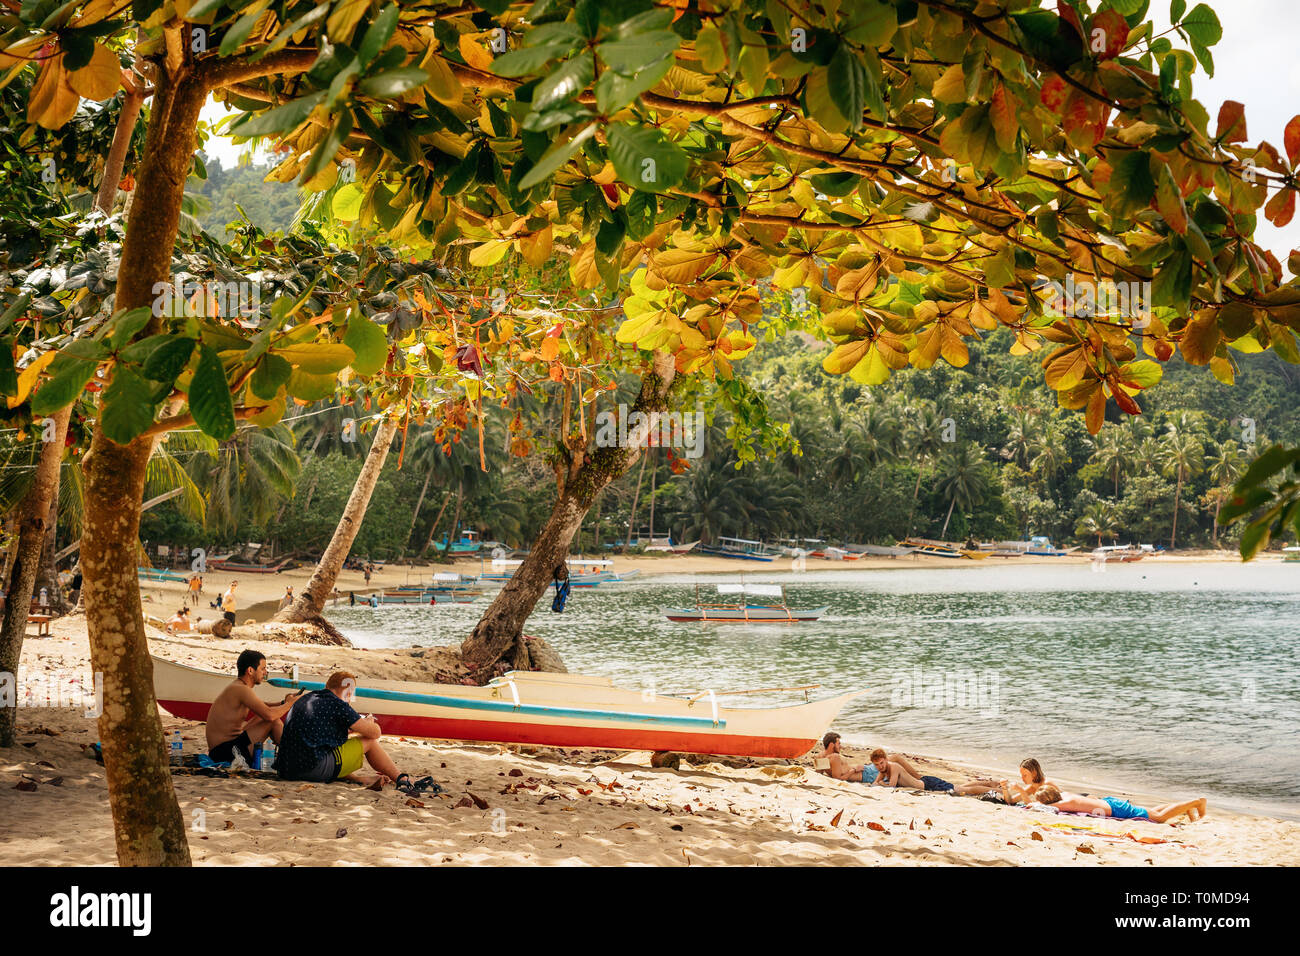 Port Barton, Palawan, Philippines - February 3, 2019: People relax on tropical beach under the lush crown of trees Stock Photo